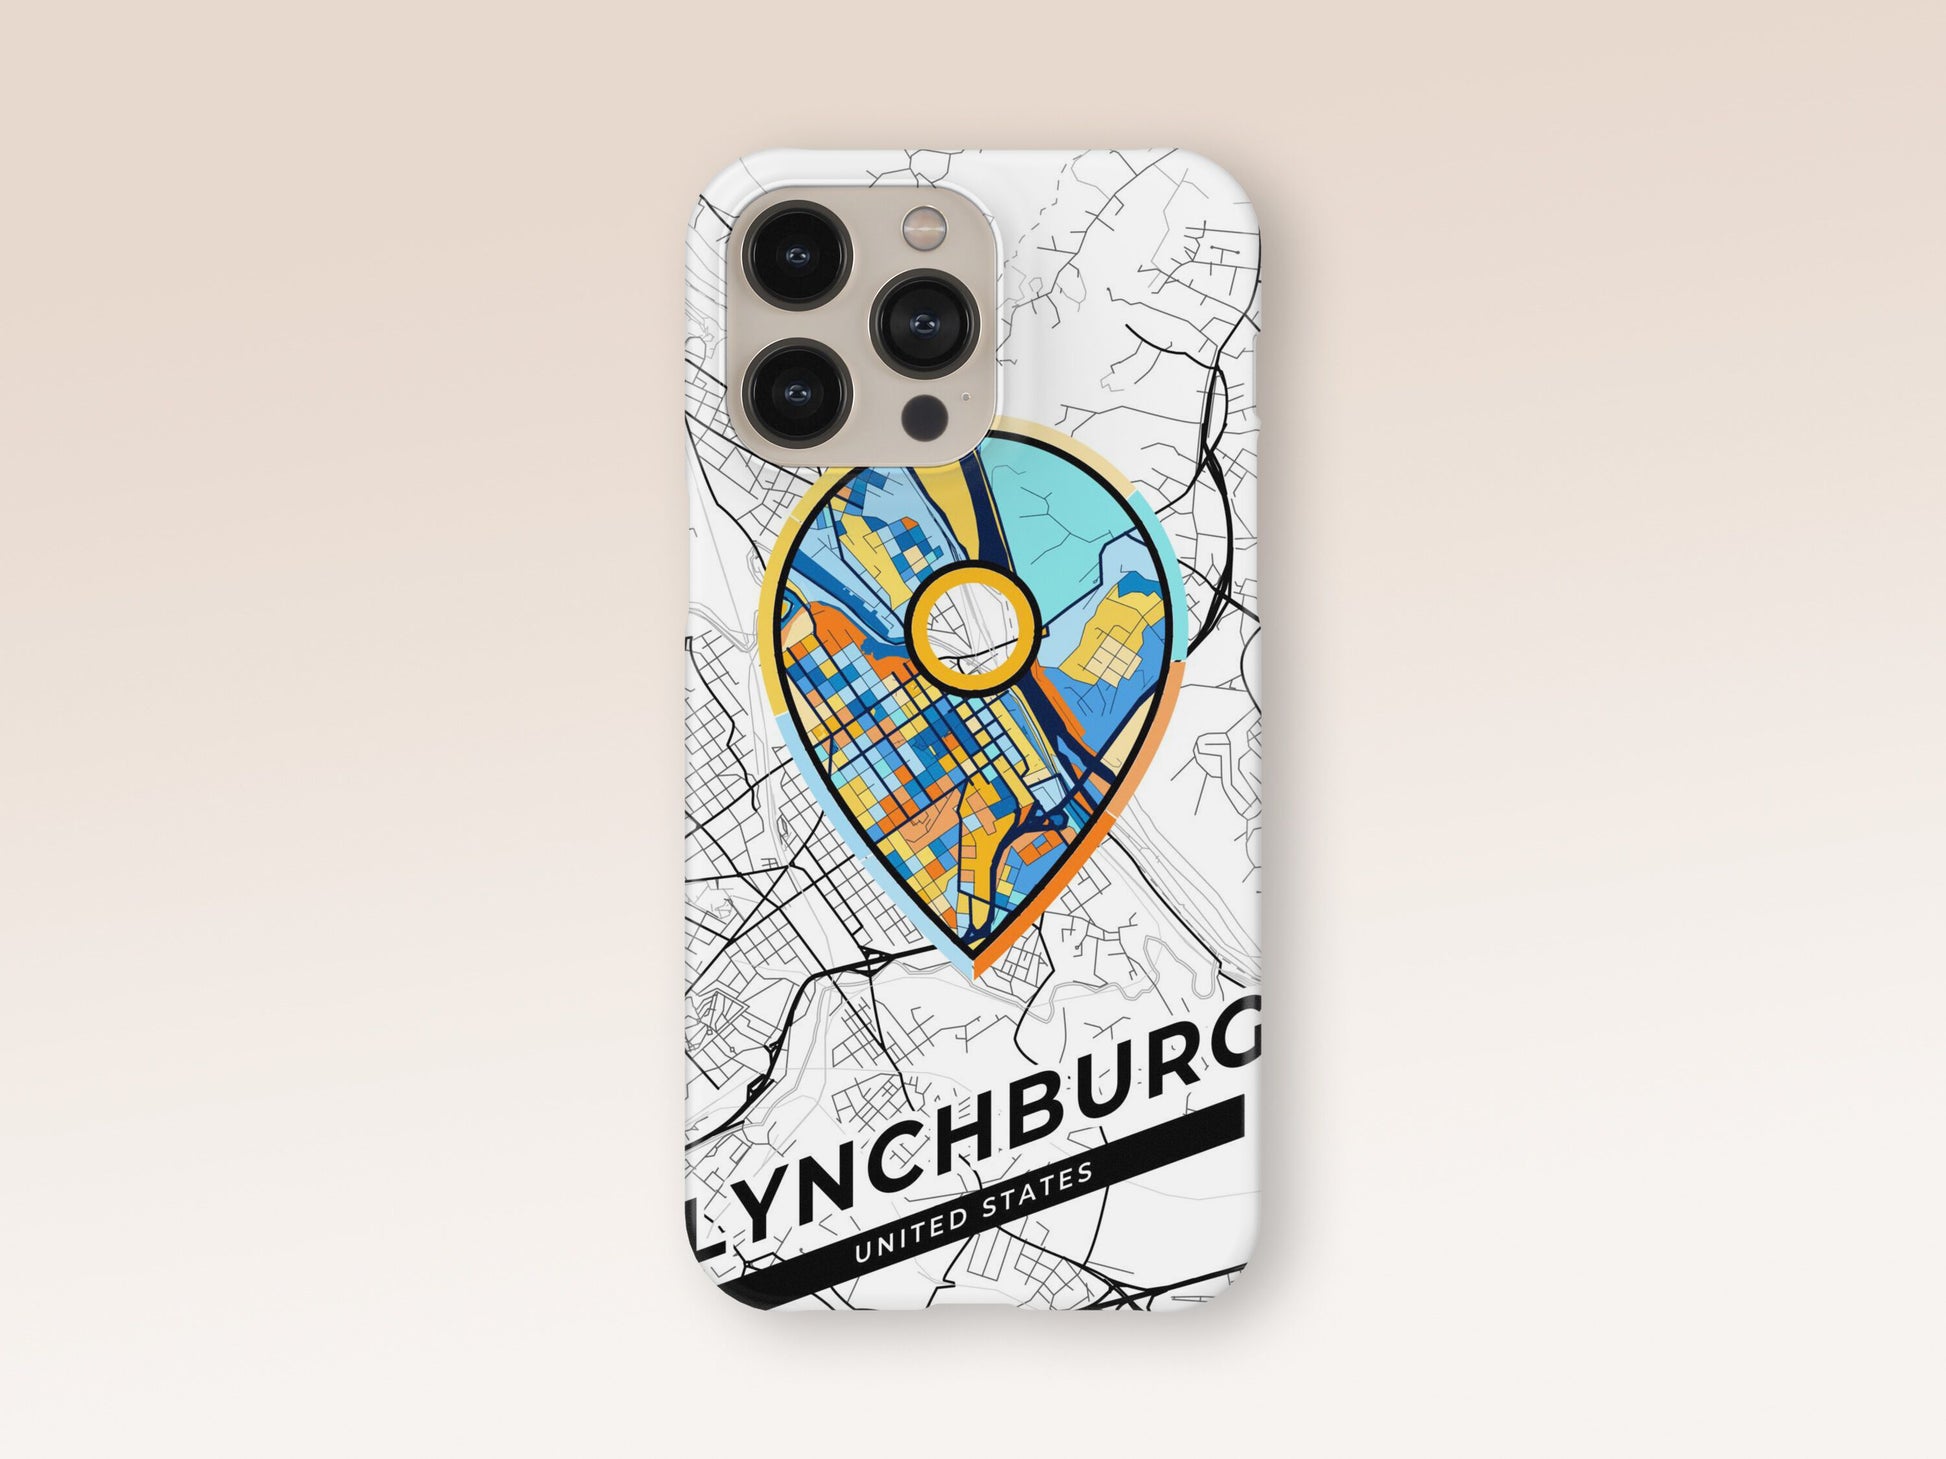 Lynchburg Virginia slim phone case with colorful icon. Birthday, wedding or housewarming gift. Couple match cases. 1